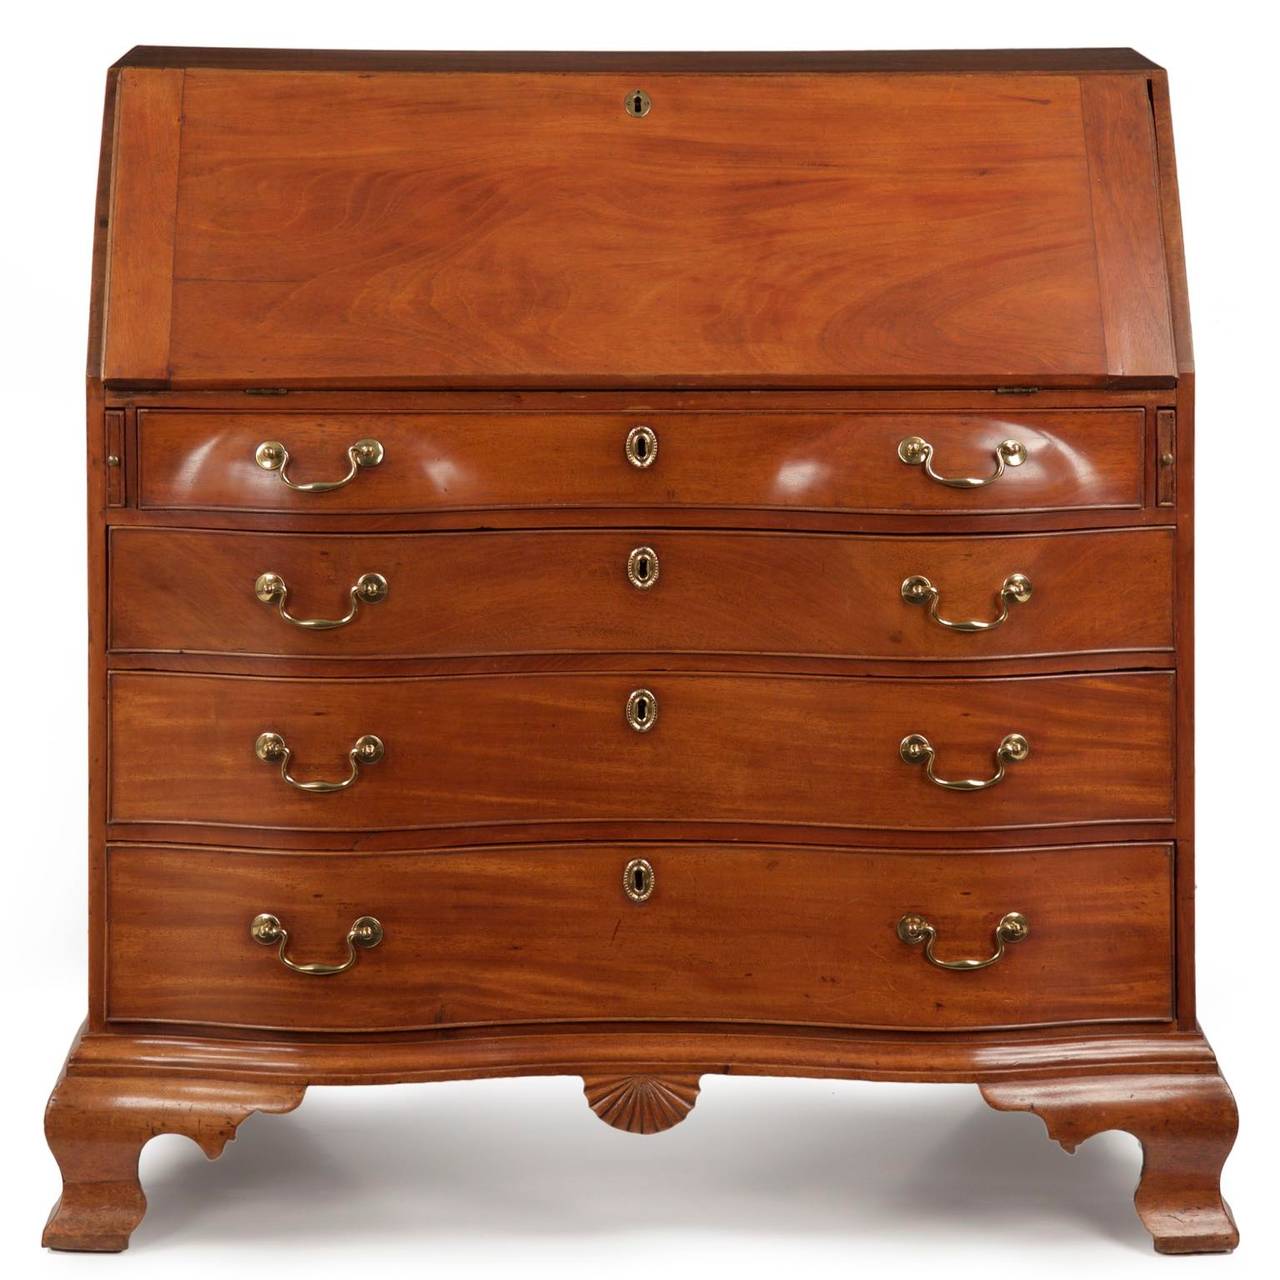 A very fine work of the Chippendale period, this desk was an expensive and very time consuming piece to produce. The oxbow drawers are a work of art, wrought from very thick solid mahogany planks that were then hand sawn and carved extensively to